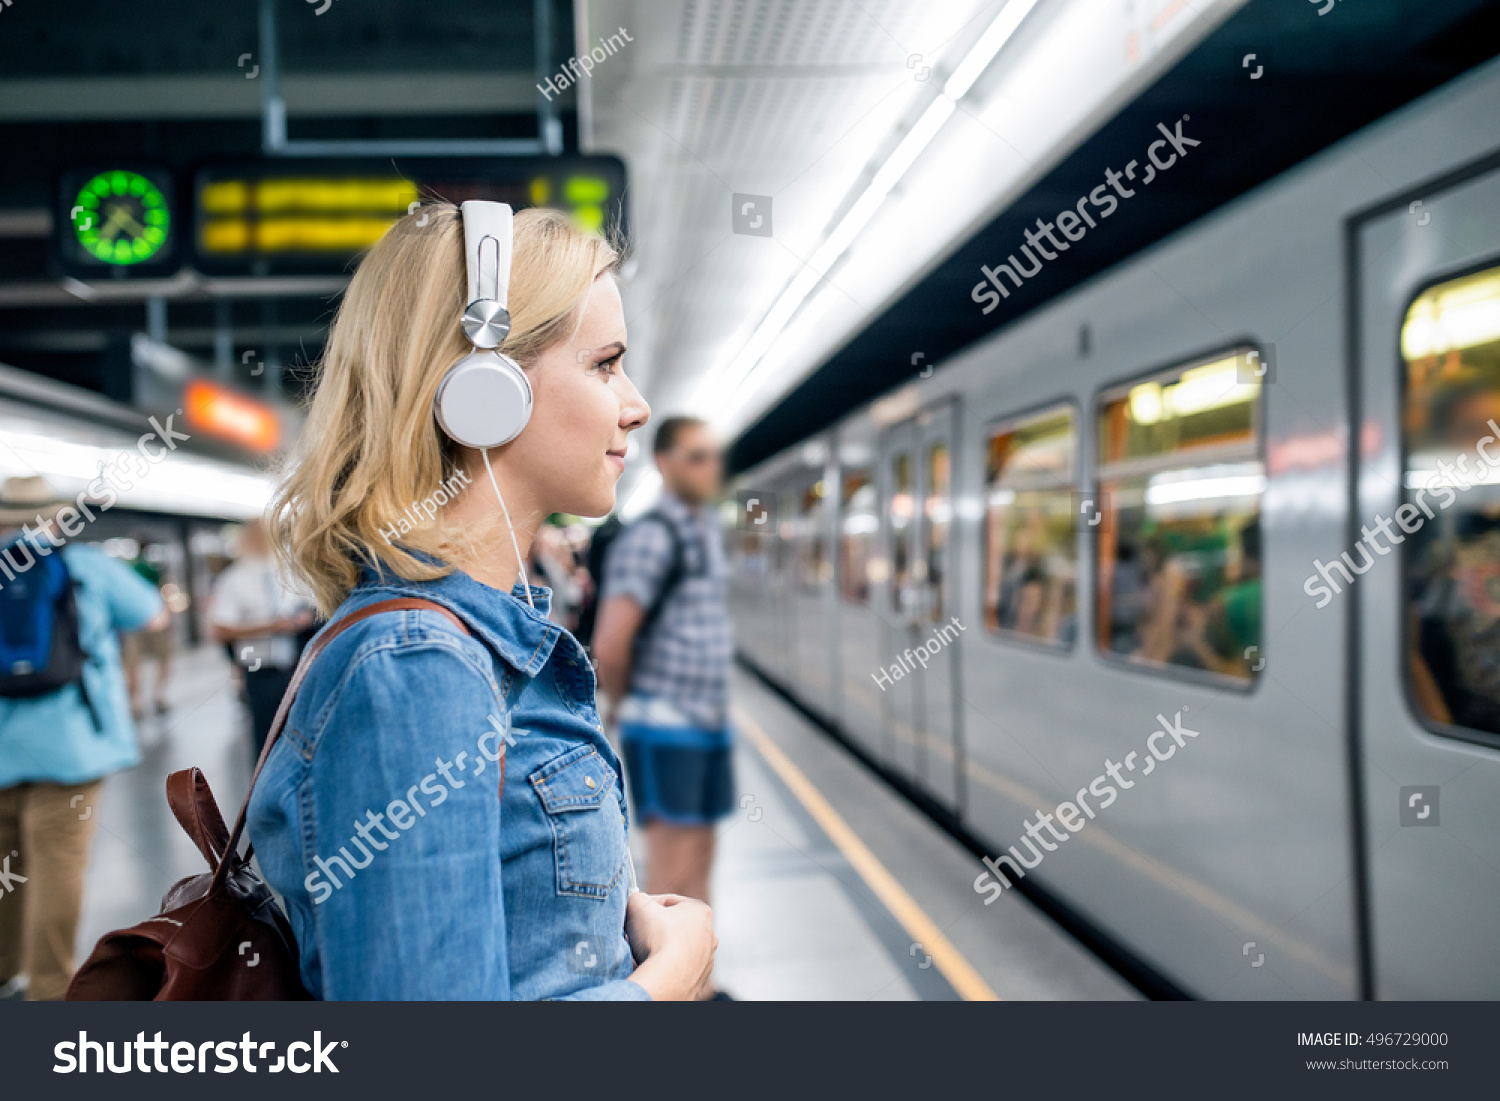 Young woman in denim shirt at the underground platform, waiting #496729000